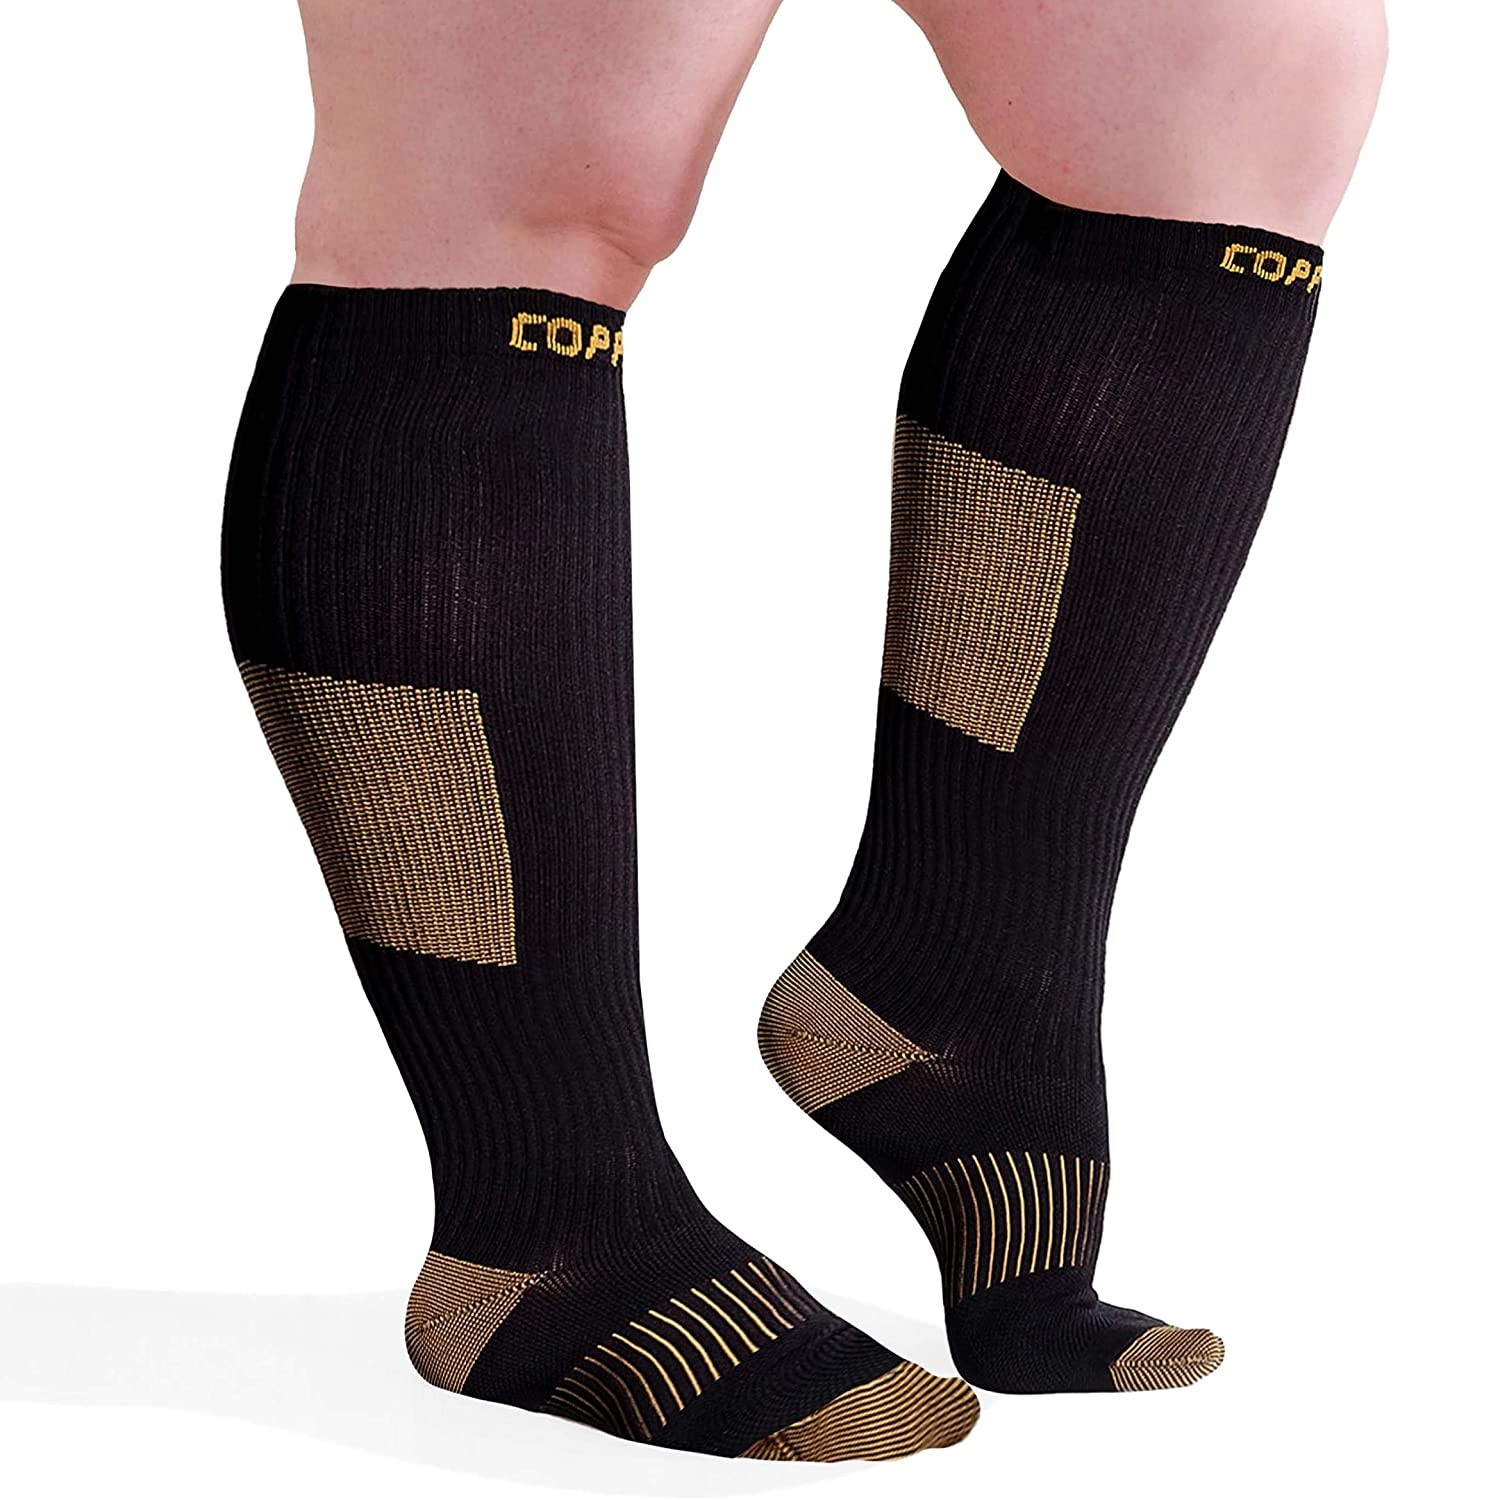 CopperJoint Copper Compression Socks Launch Ends on a High After Exceptional Sales